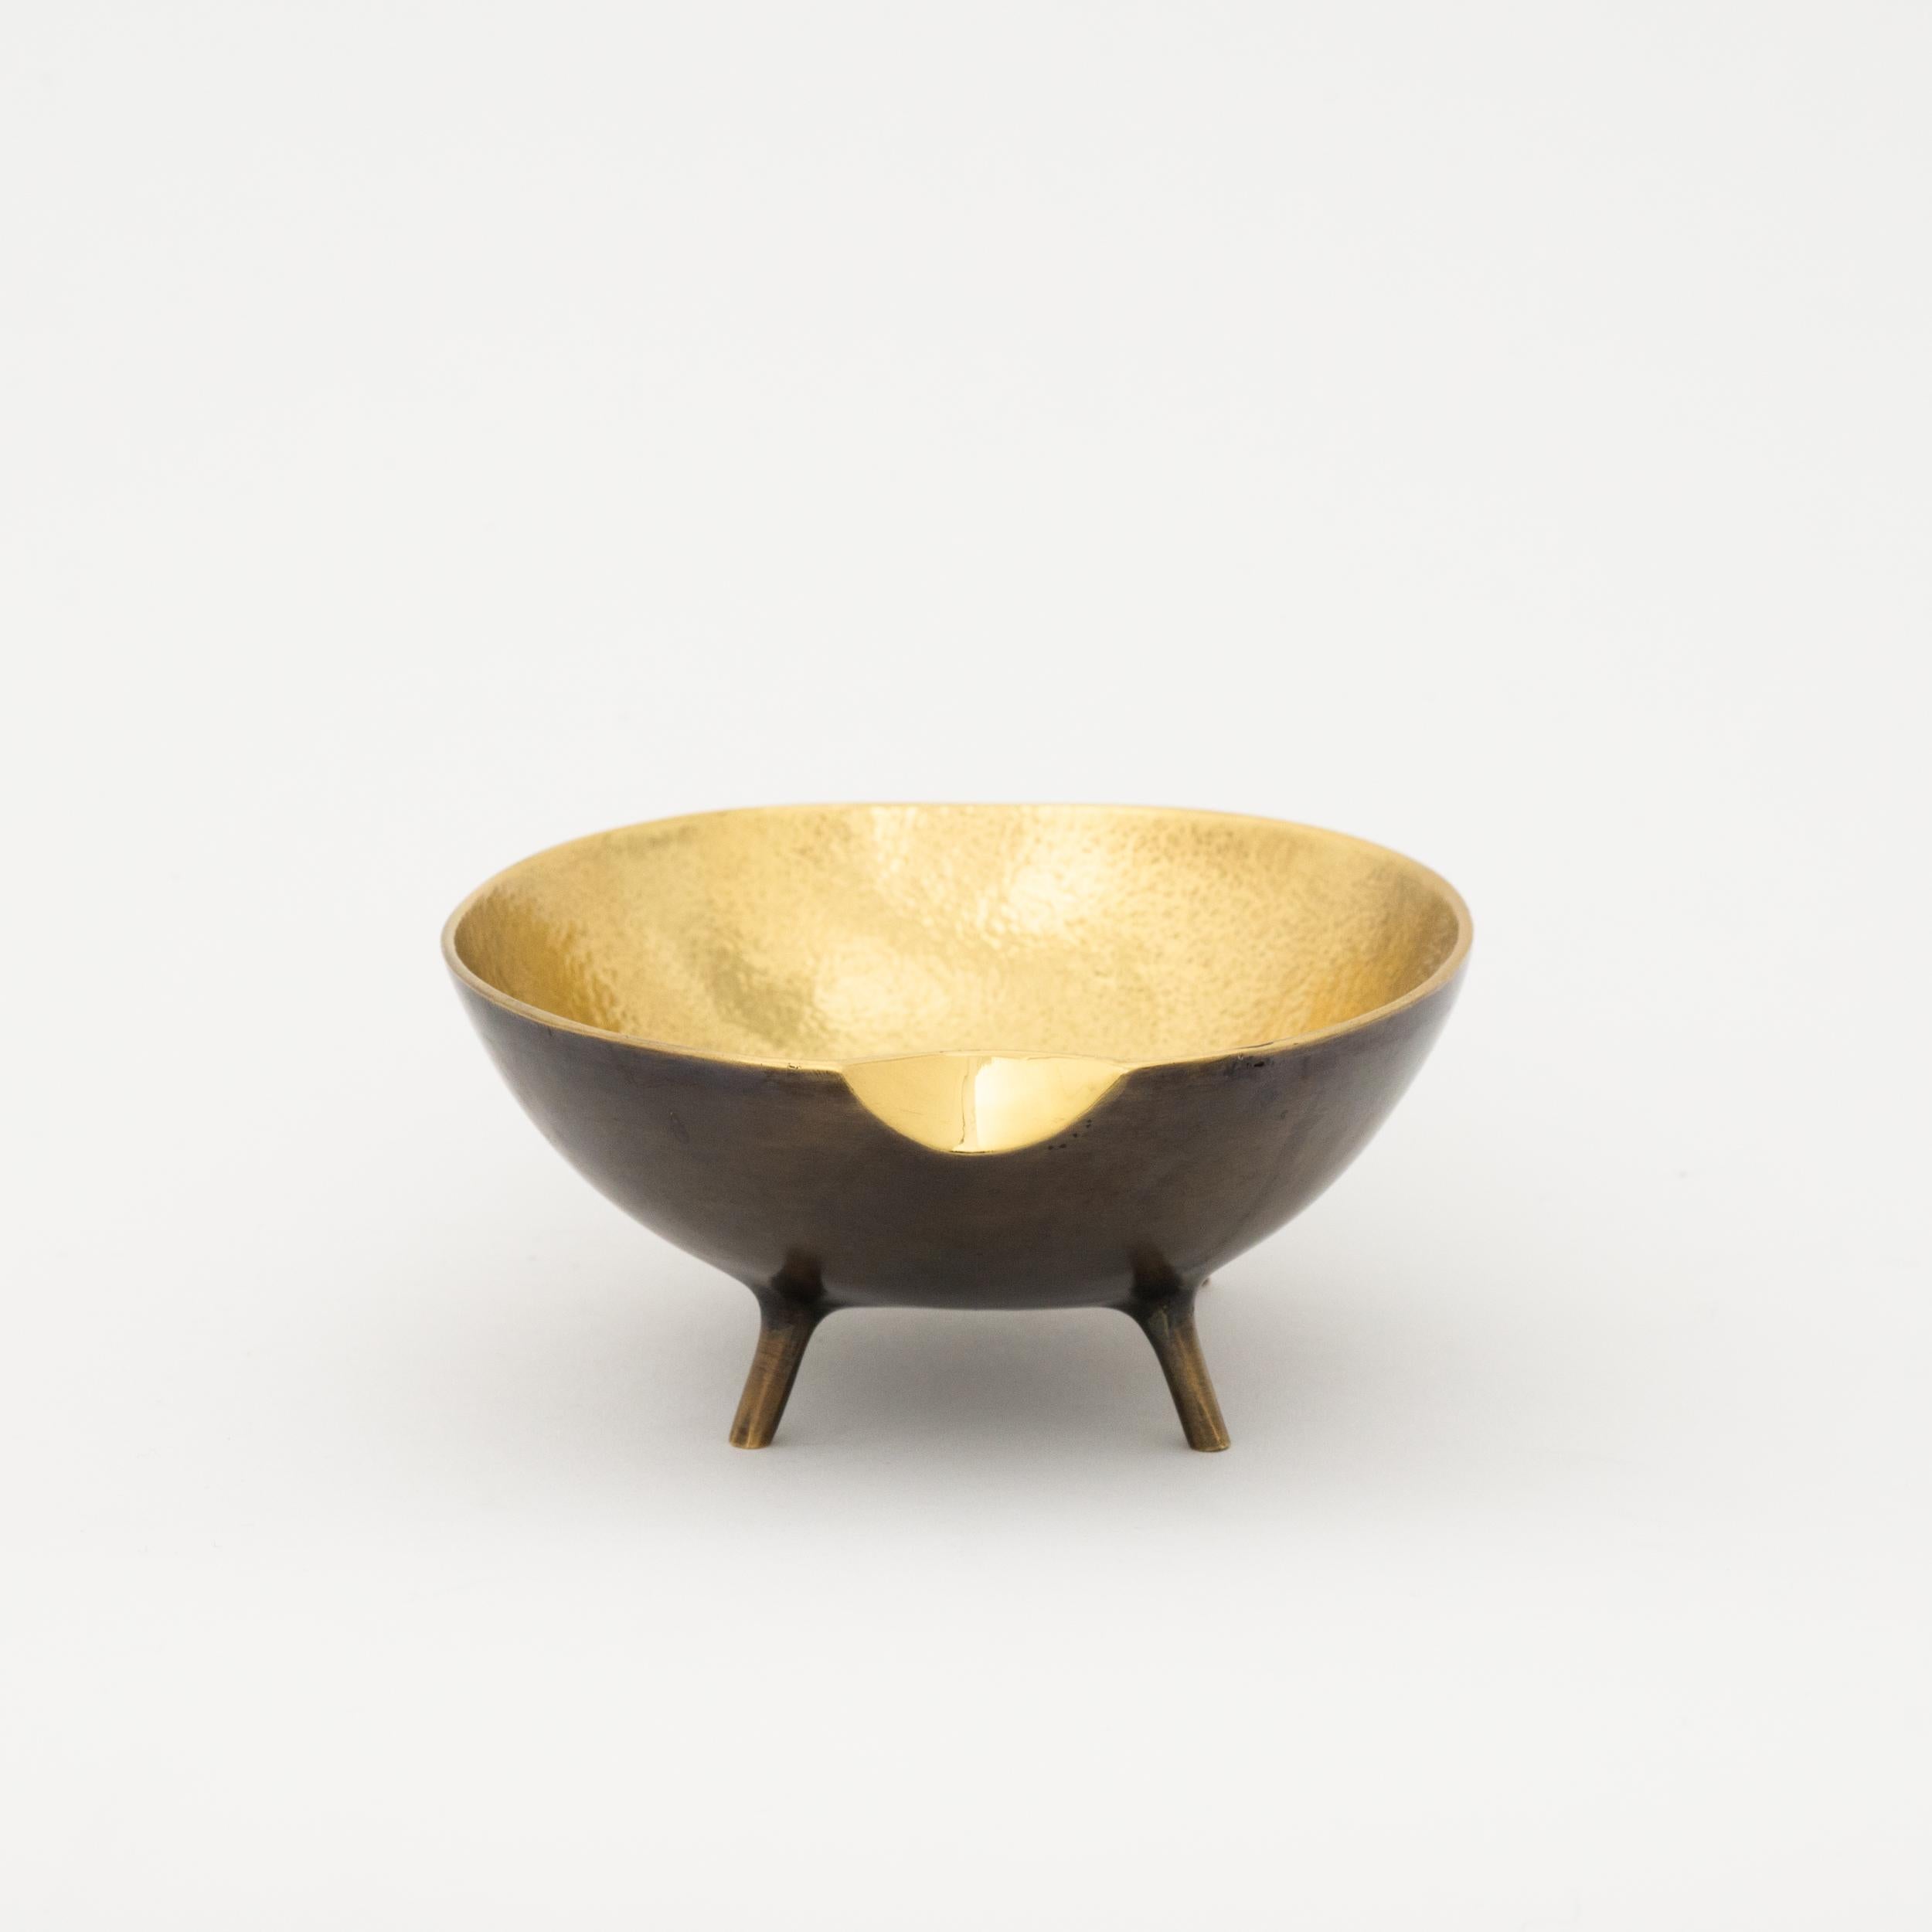 Cast Brass Decorative Bowl with Legs, Vide-poche, with Bronze Patina In New Condition For Sale In London, GB